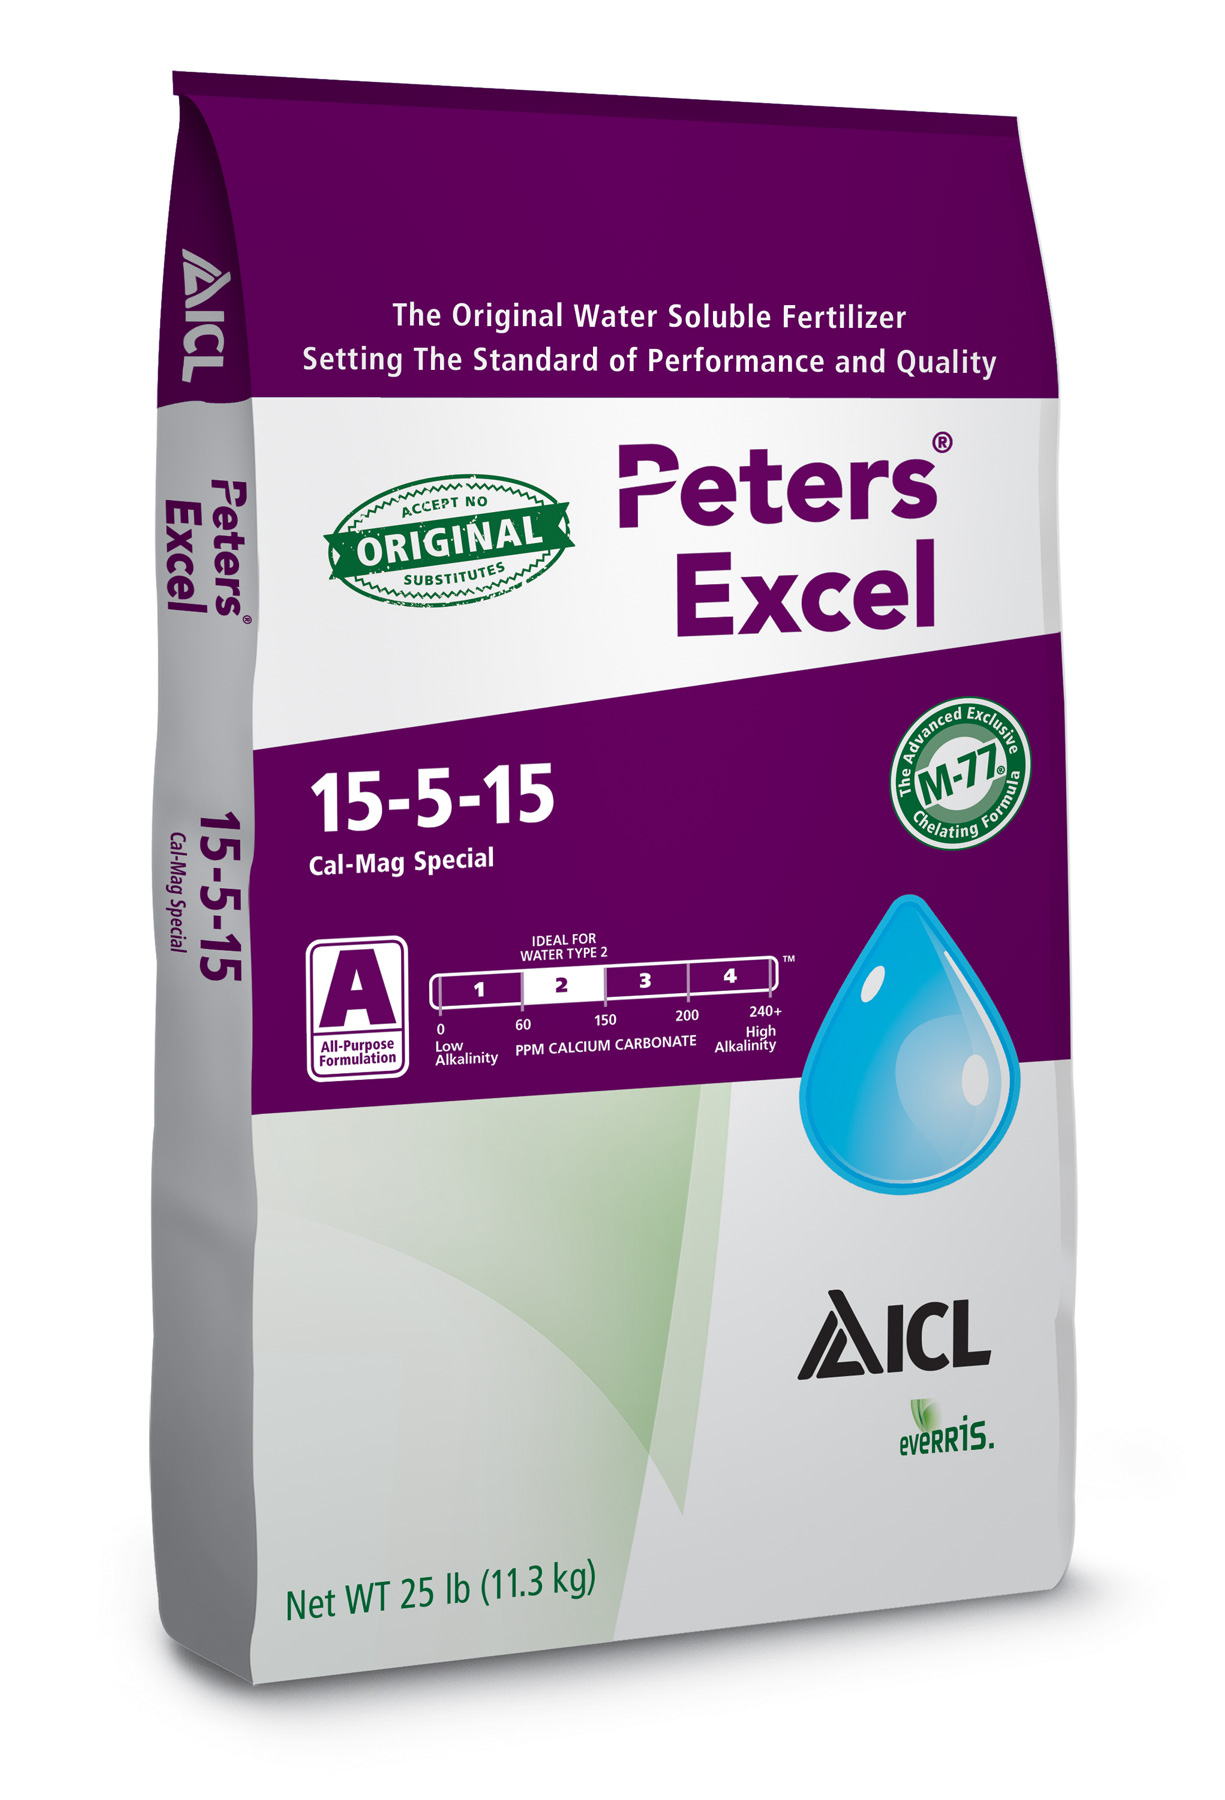 Peters Excel 15-5-15 Cal-Mag Special with Black Iron - 25 lb Bag - Water Soluble Fertilizer